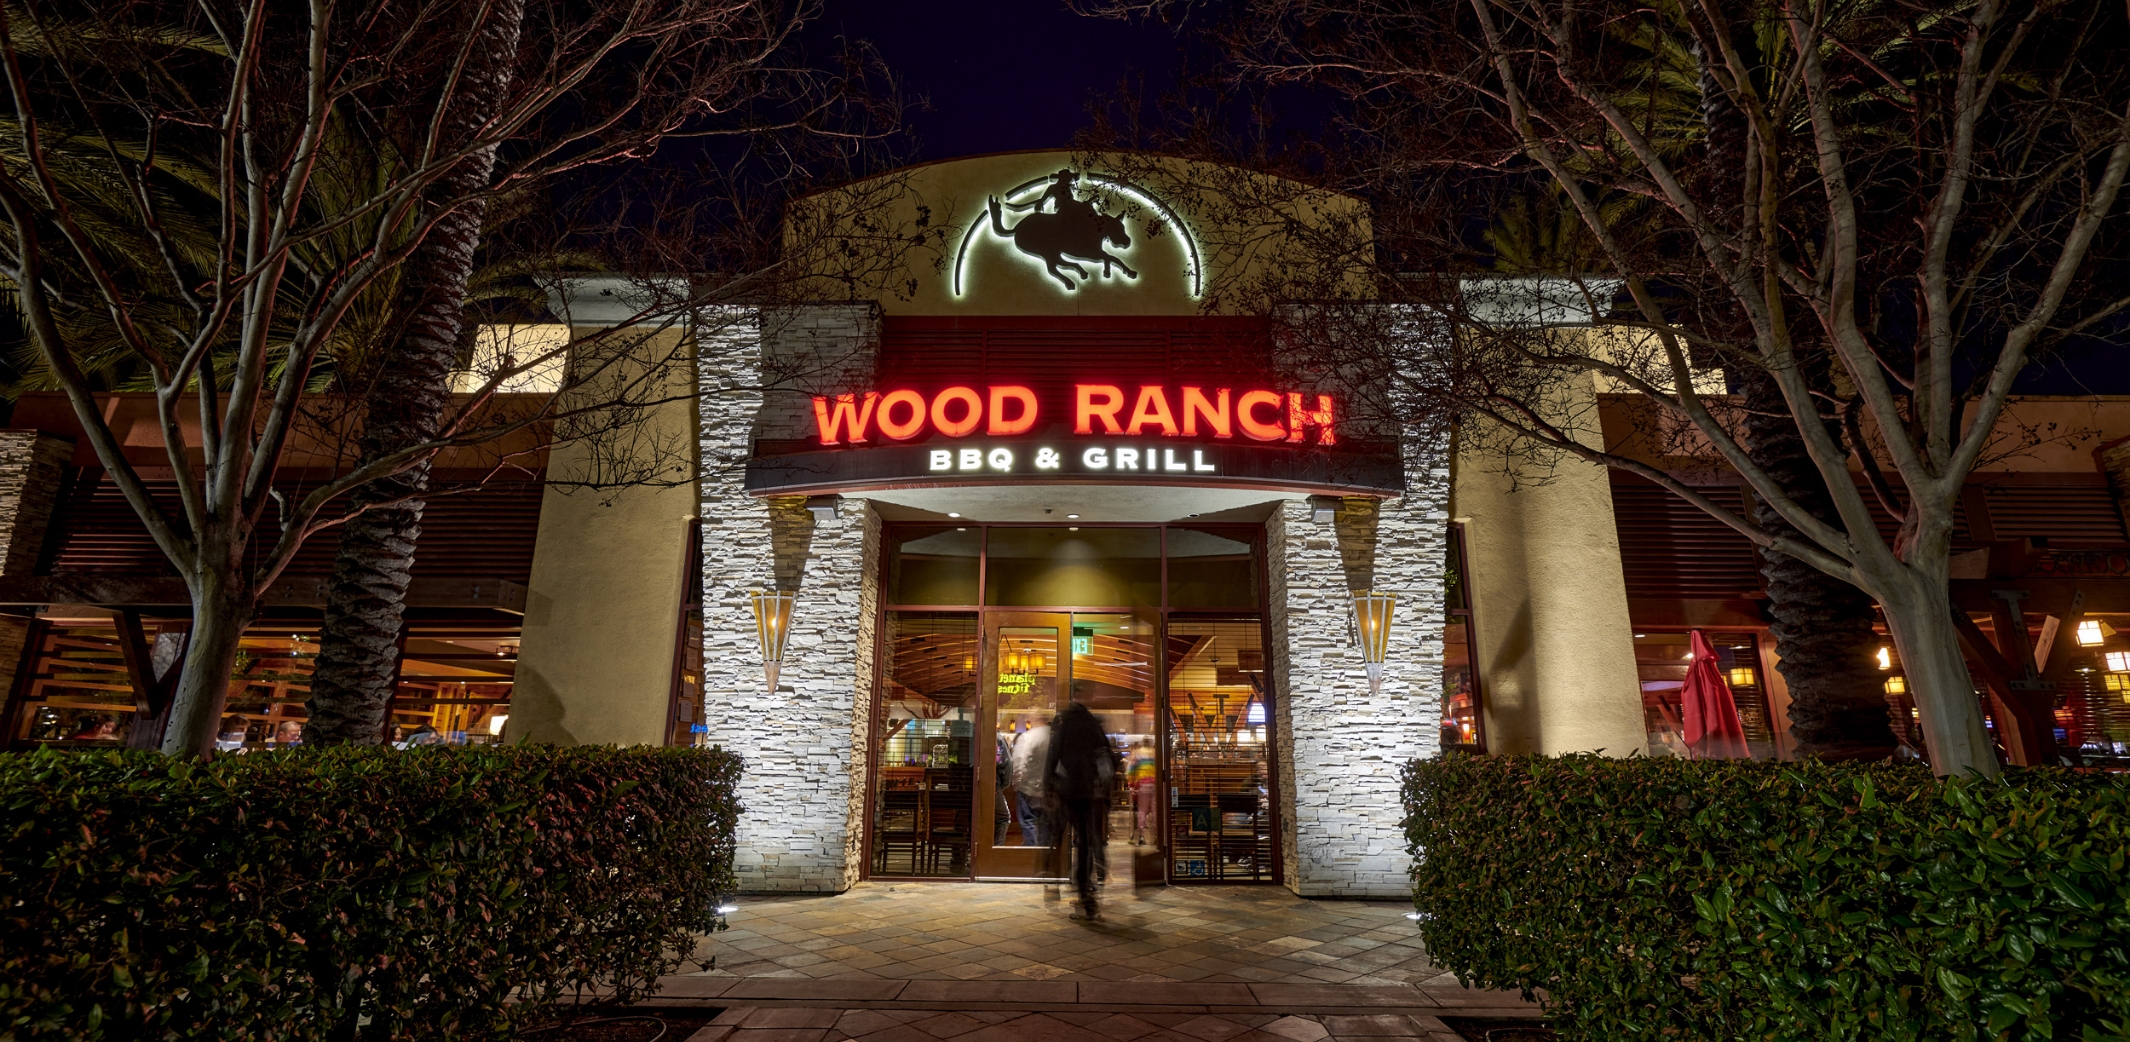 Exterior view of Wood Ranch BBQ & Grill at night with illuminated signage and a warmly lit entrance. Trees and neatly trimmed hedges frame the building, creating a welcoming atmosphere for diners.